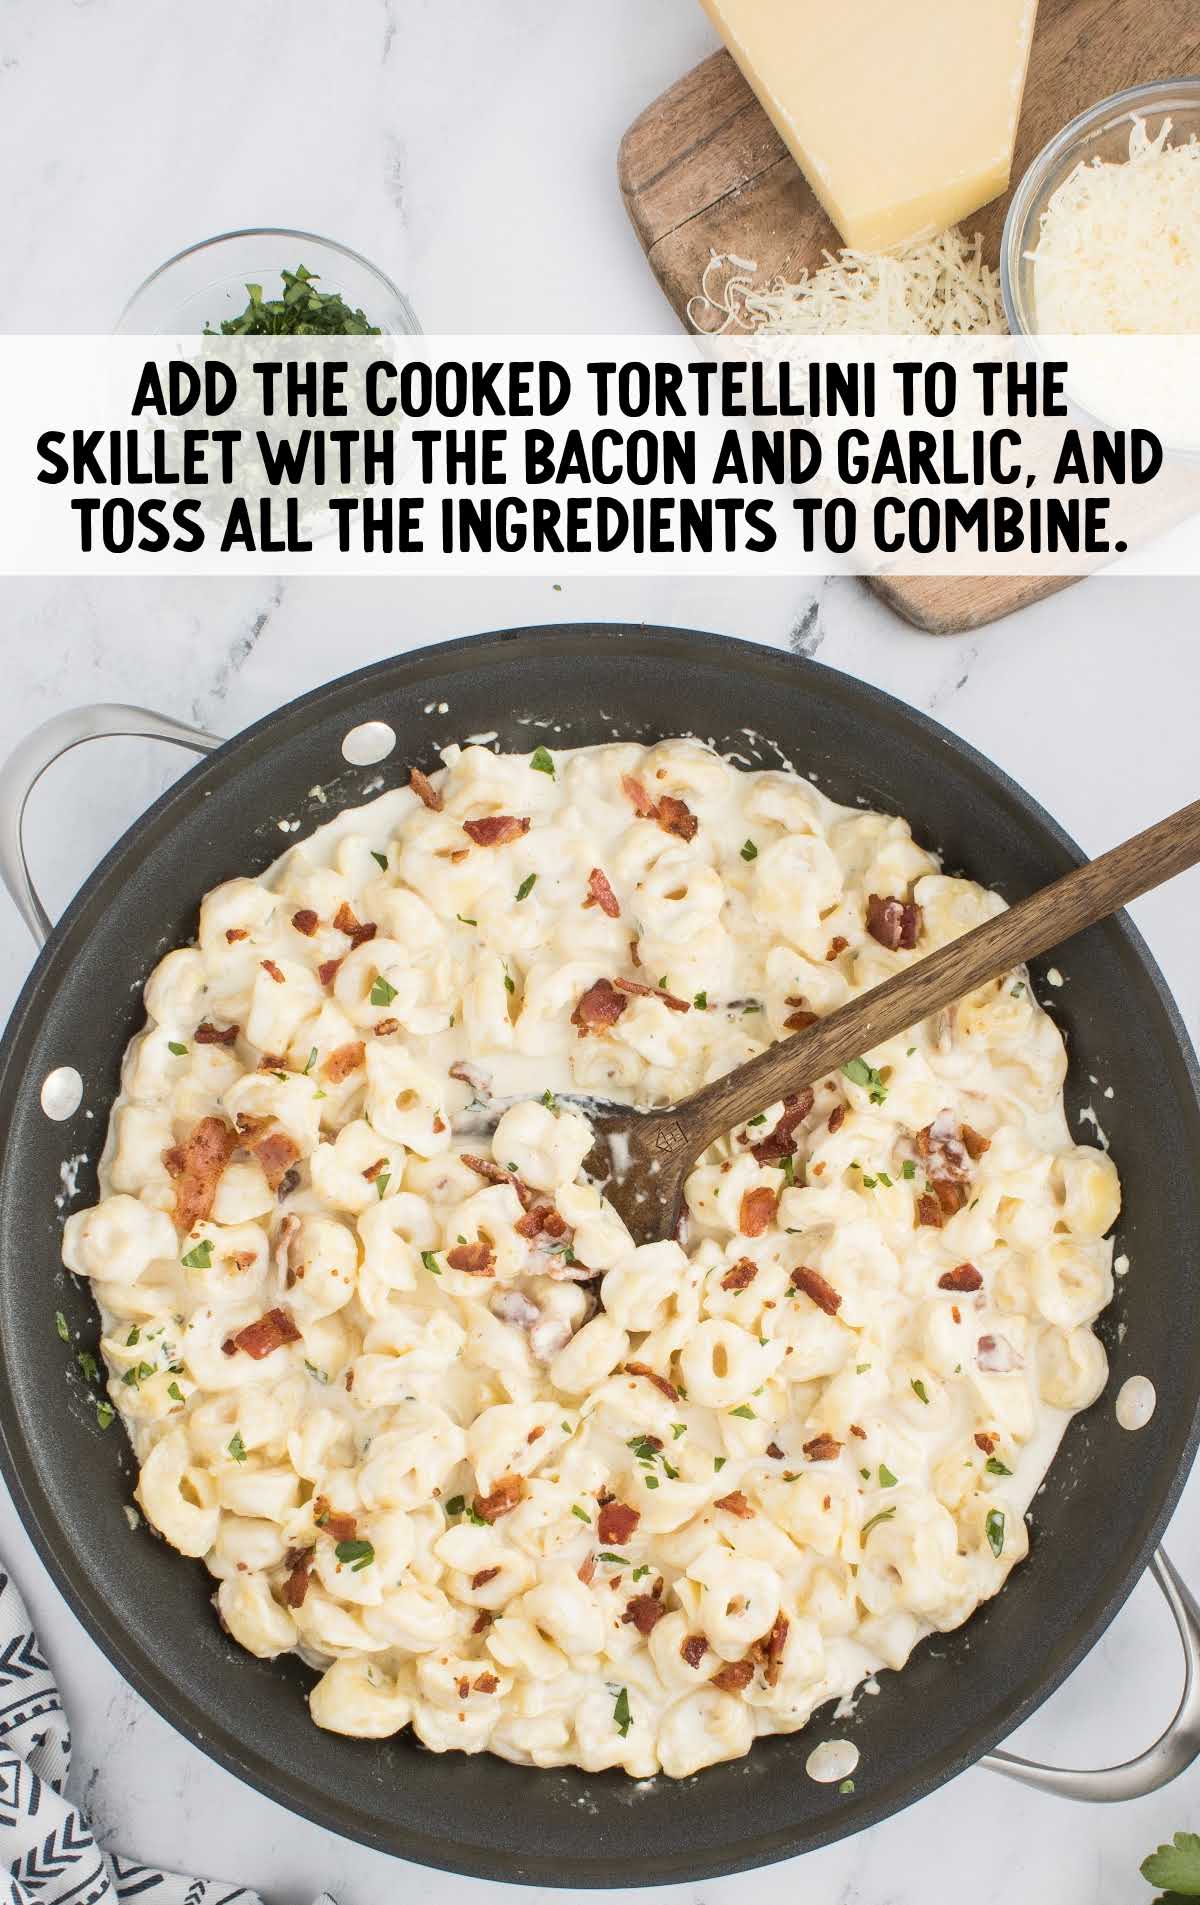 cooked tortellini added to the skillet with the bacon and garlic